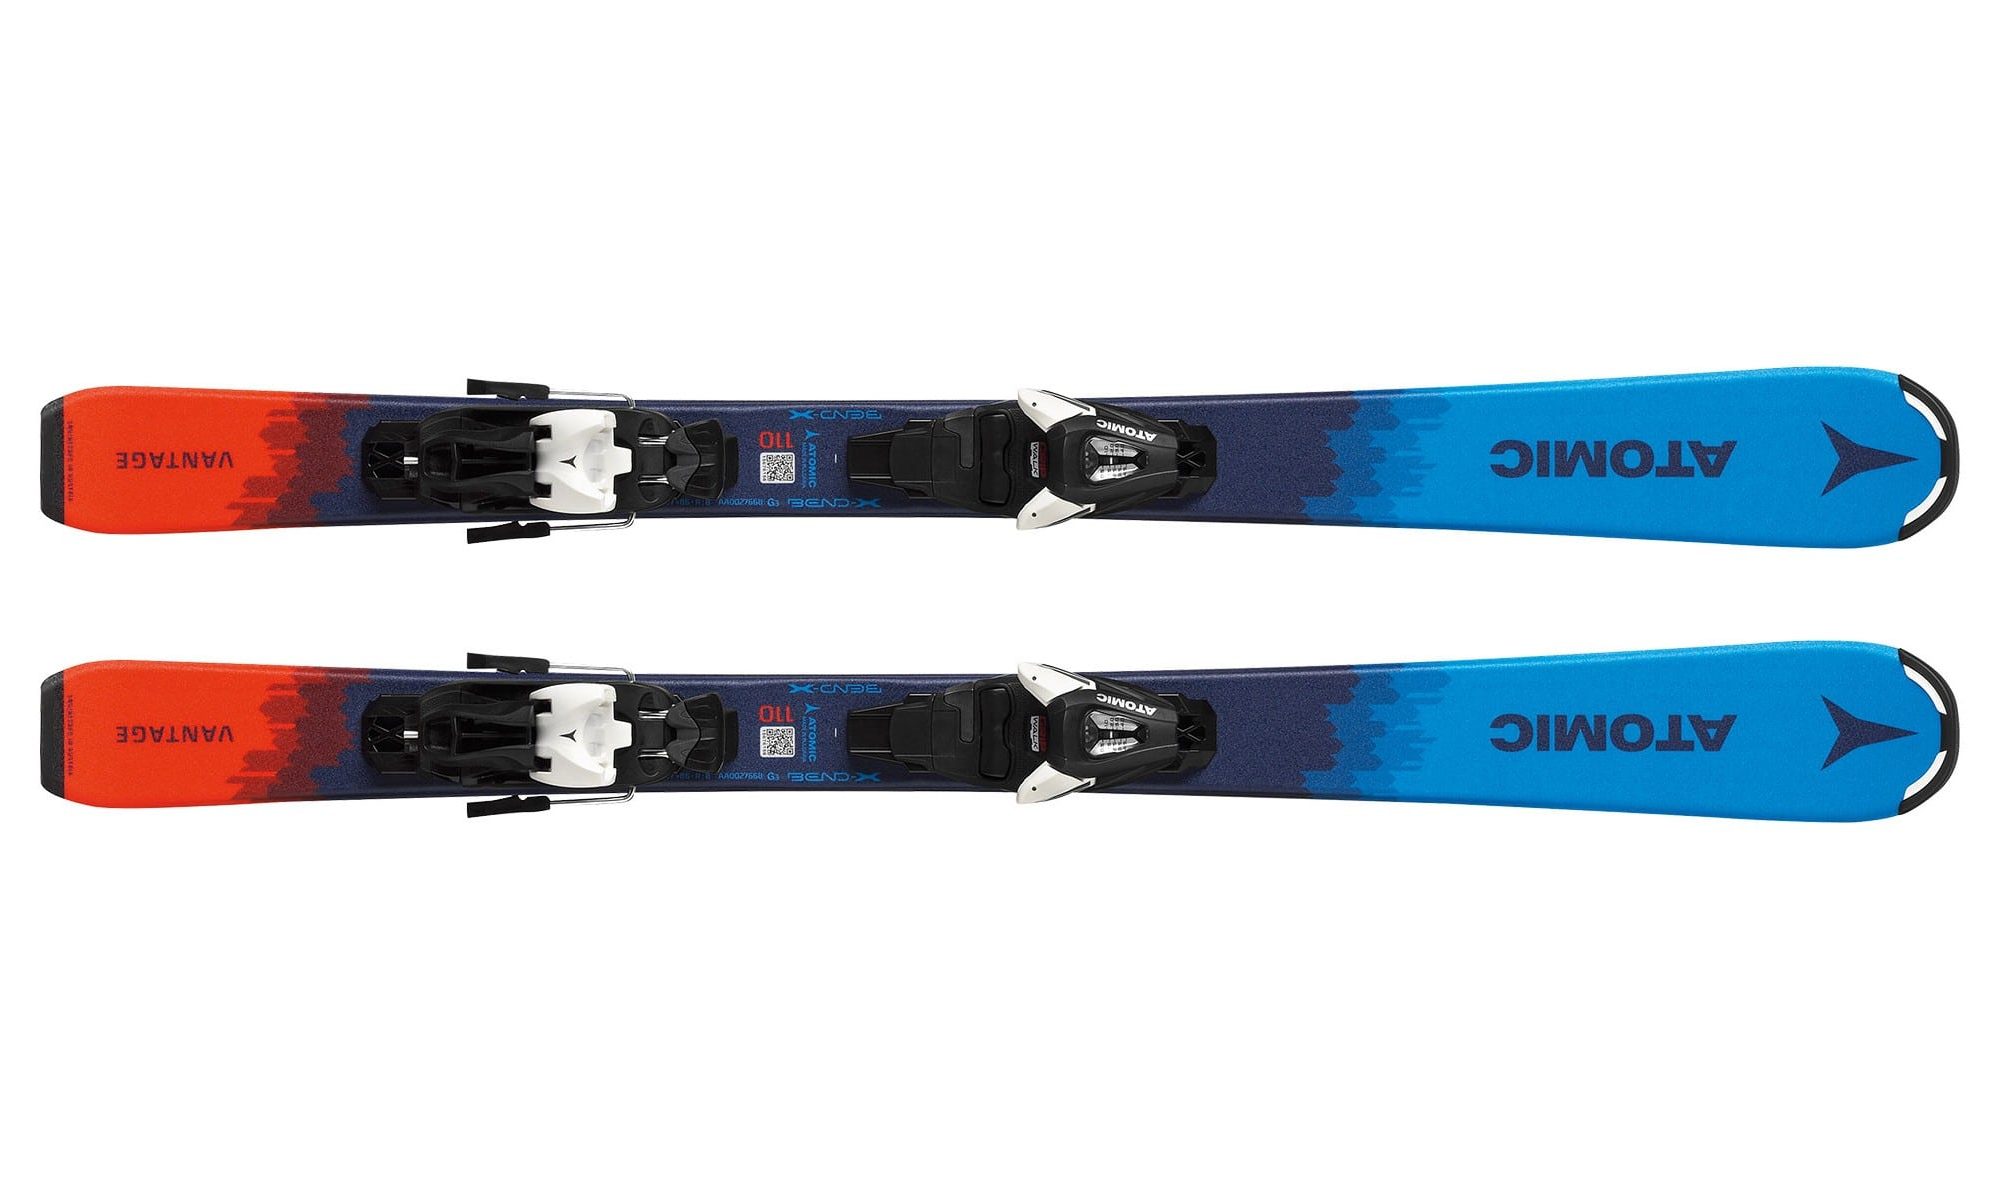 These are the Atomic children's skis that can be won in the raffle.